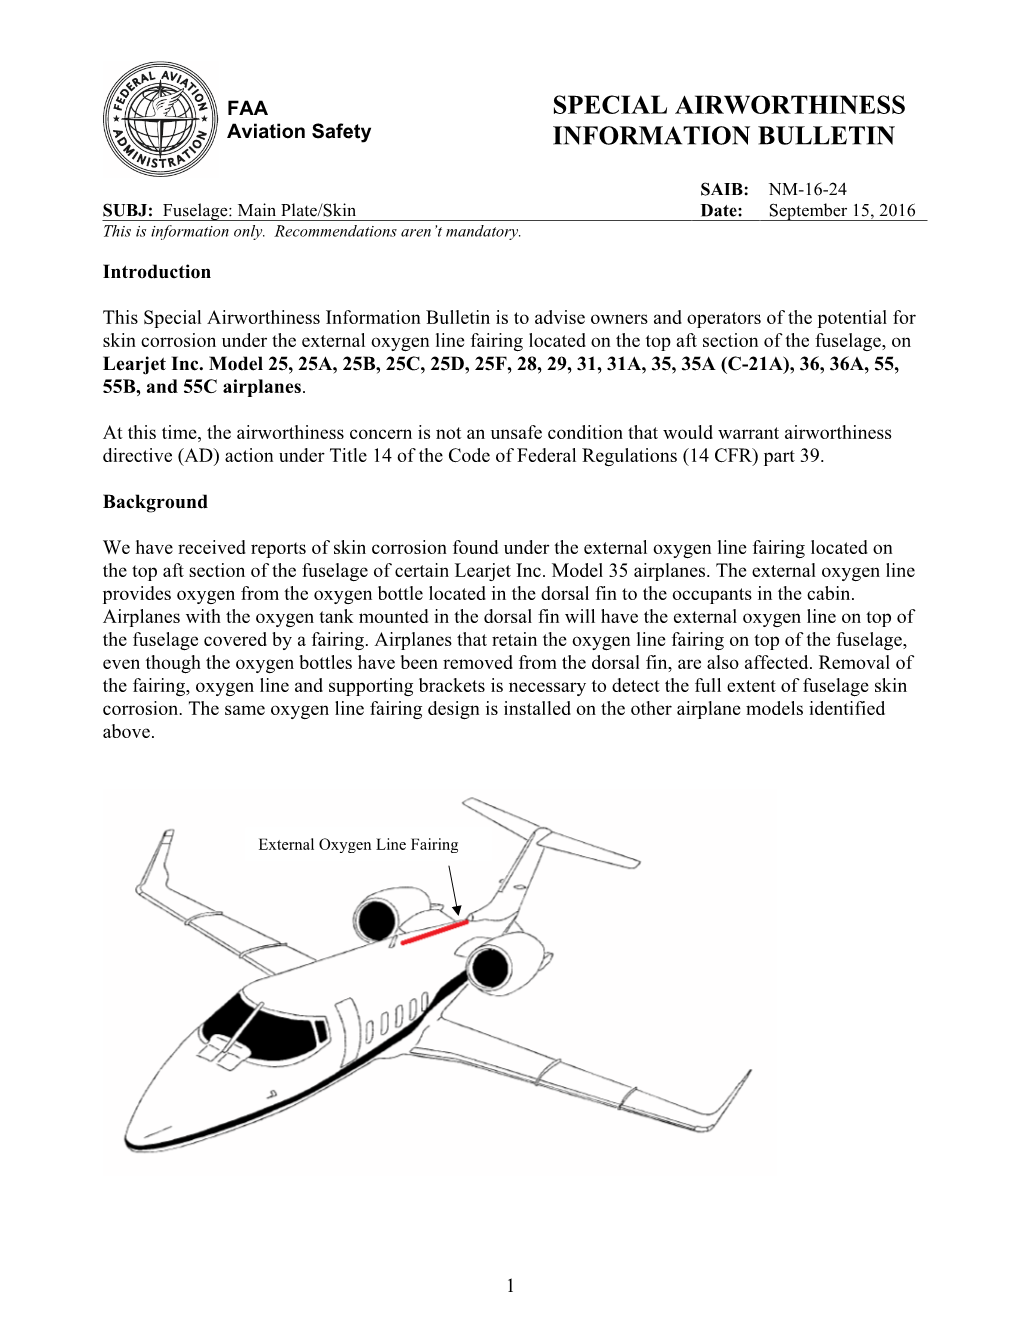 Special Airworthiness Information Bulletin